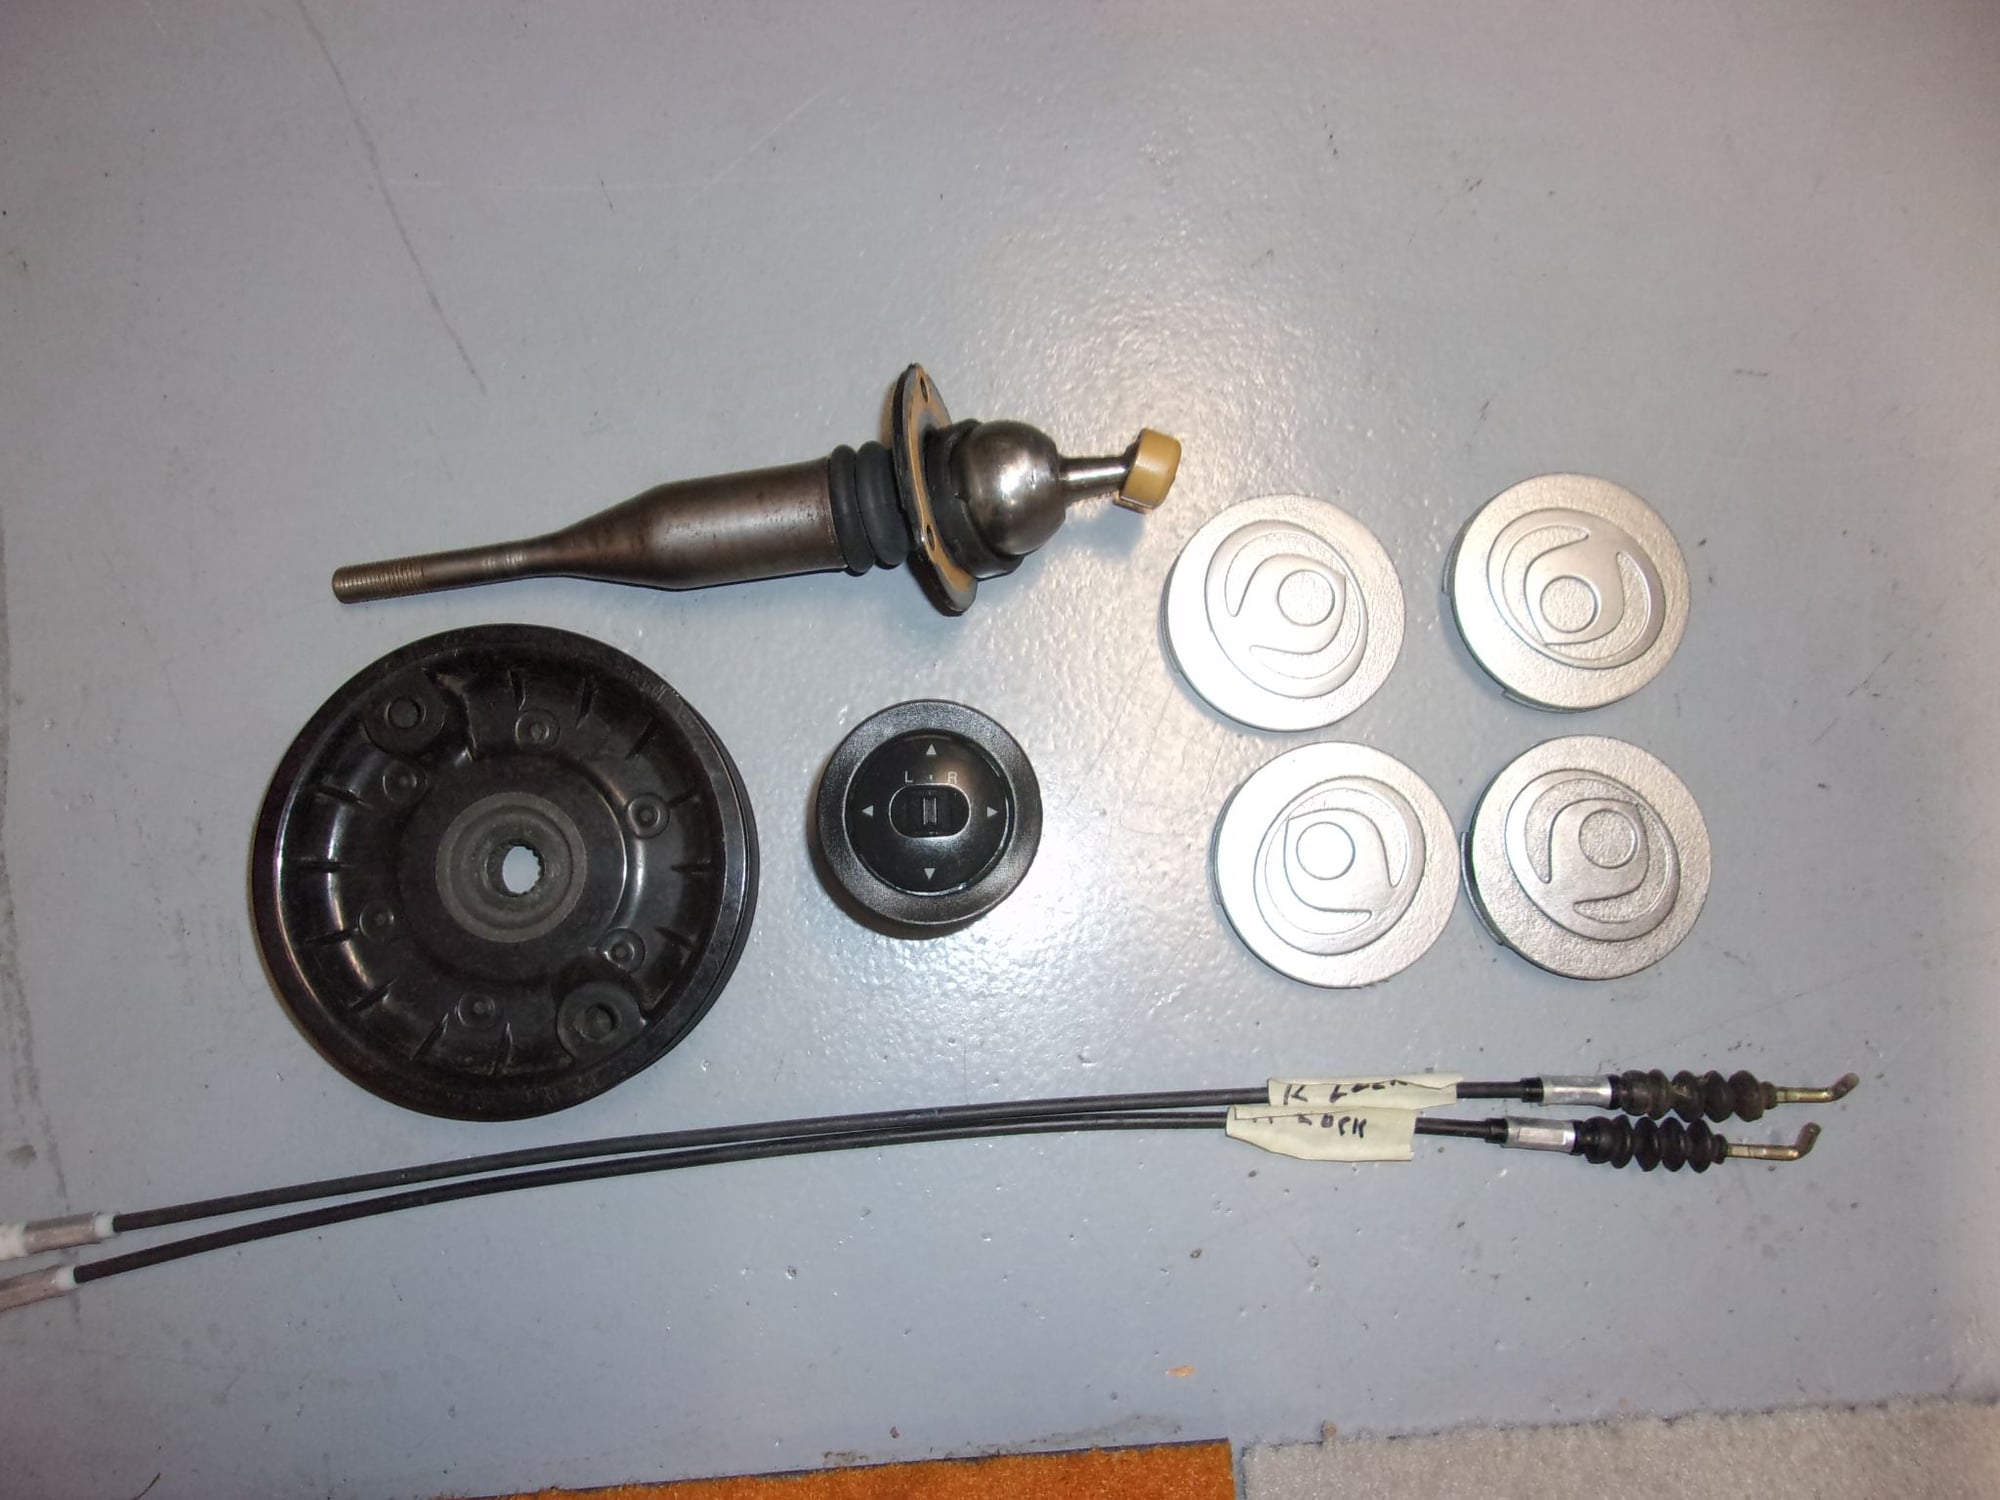 Miscellaneous - Hard-To-Find Parts #6 - Used - 1993 to 1994 Mazda RX-7 - Murfreesboro, TN 37130, United States